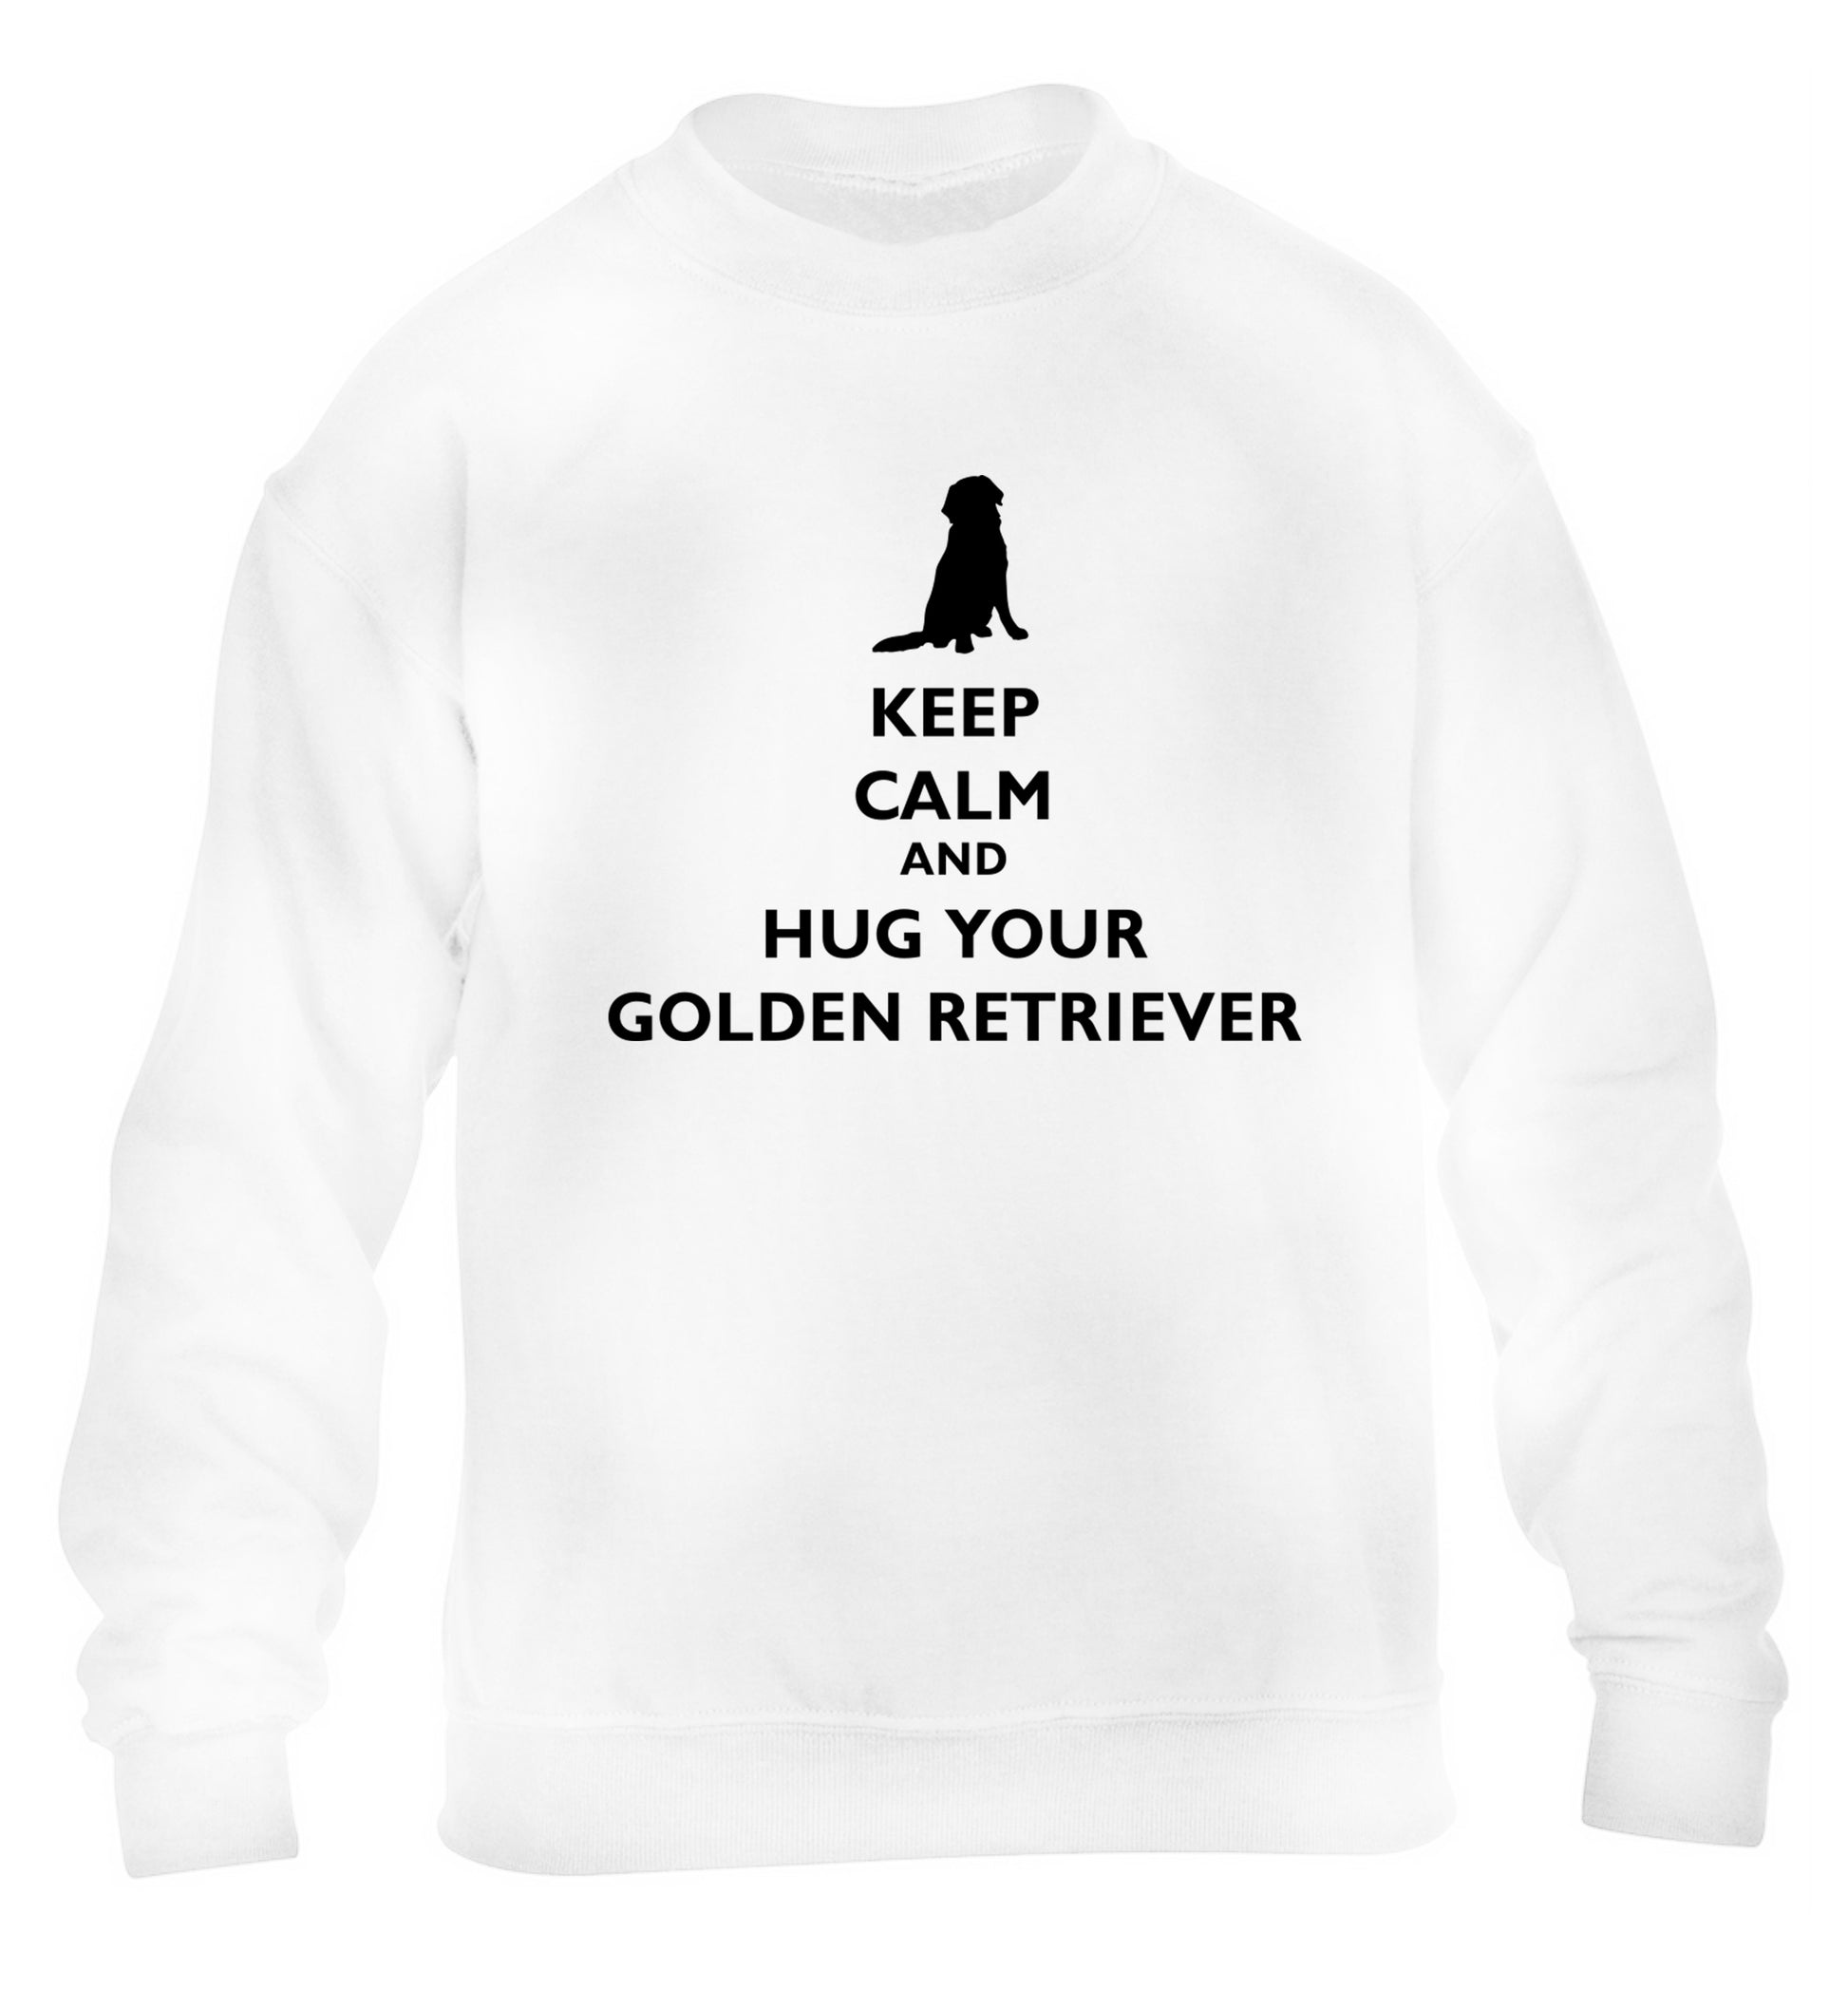 Keep calm and hug your golden retriever children's white sweater 12-13 Years